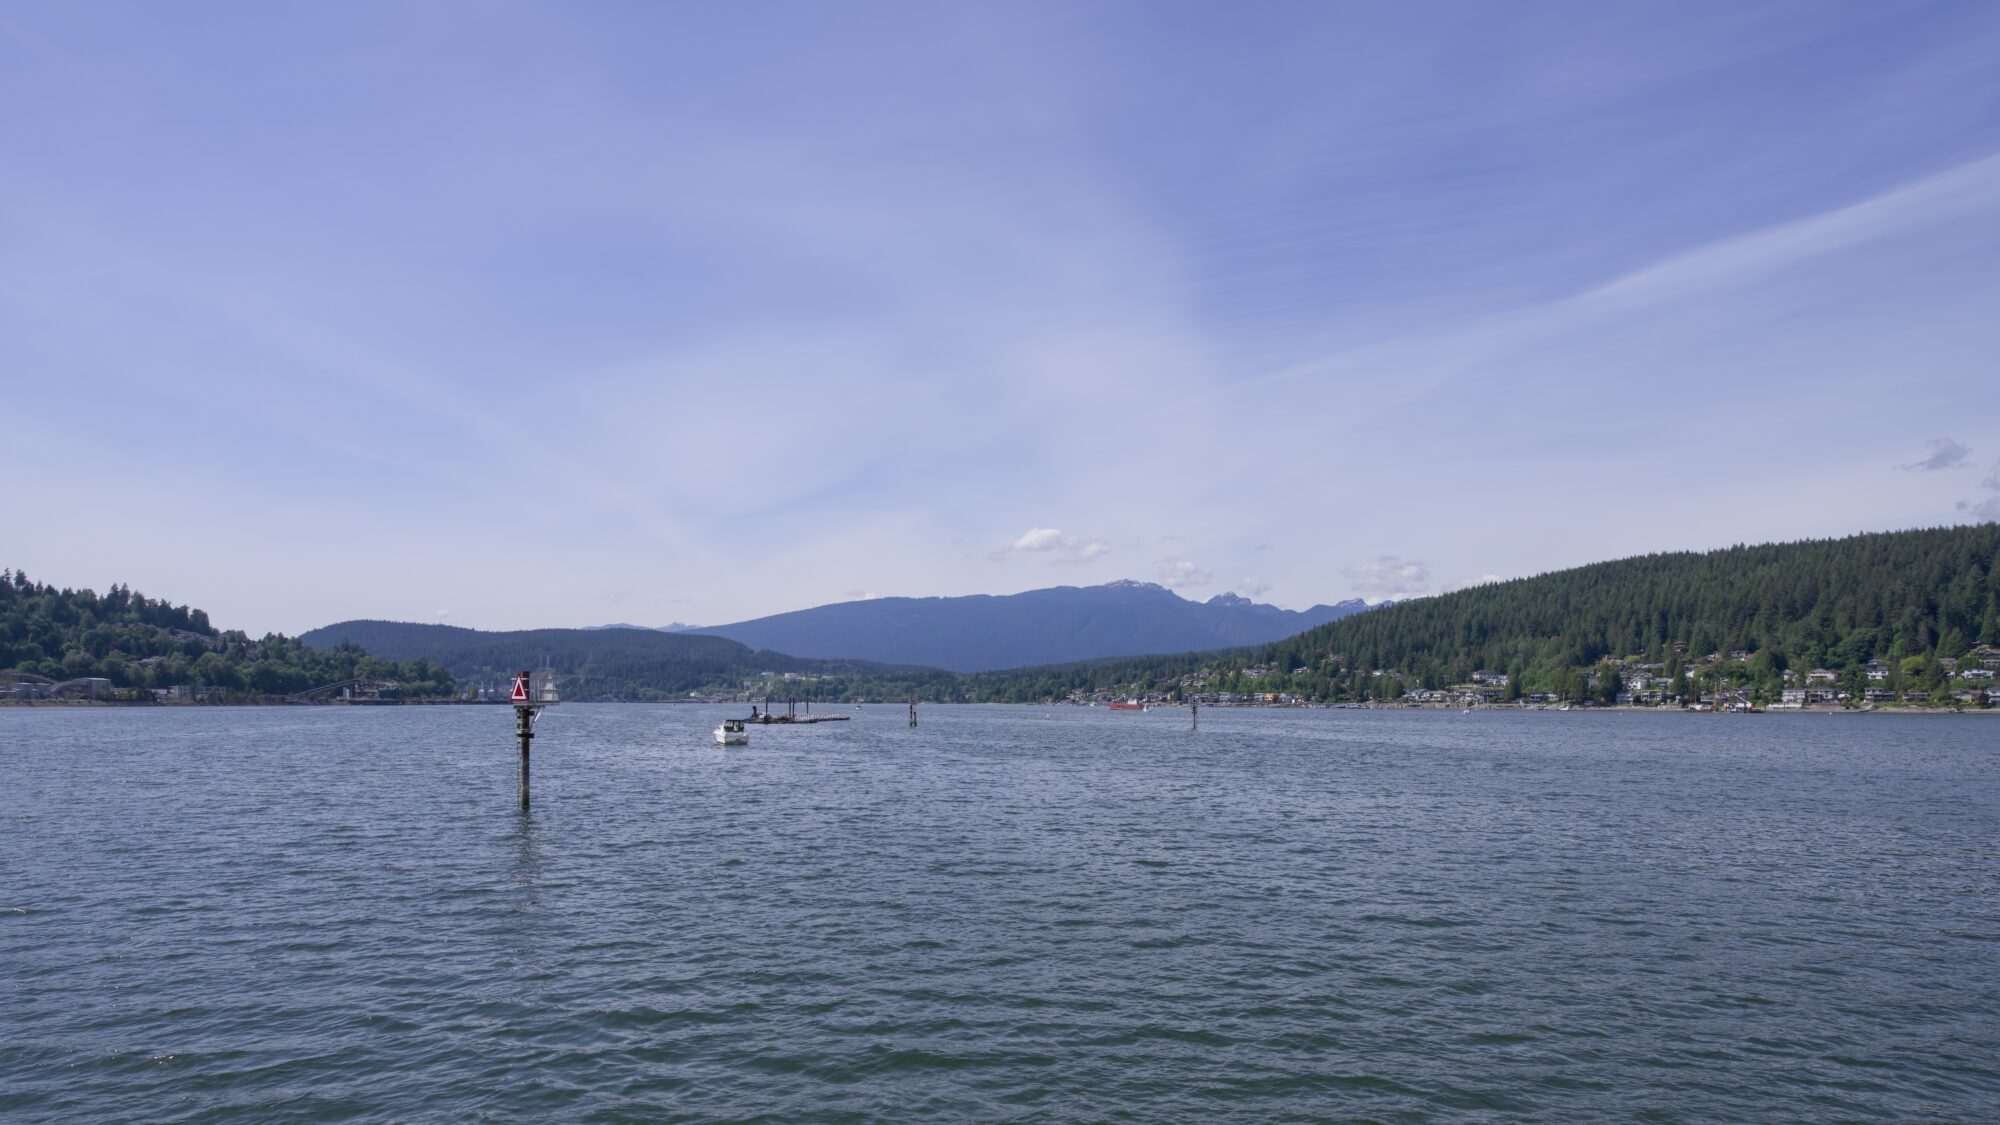 View from the Rocky Point Park pier: some pilings, and water off in the distance between low rolling mountains under a blue sky with wispy clouds